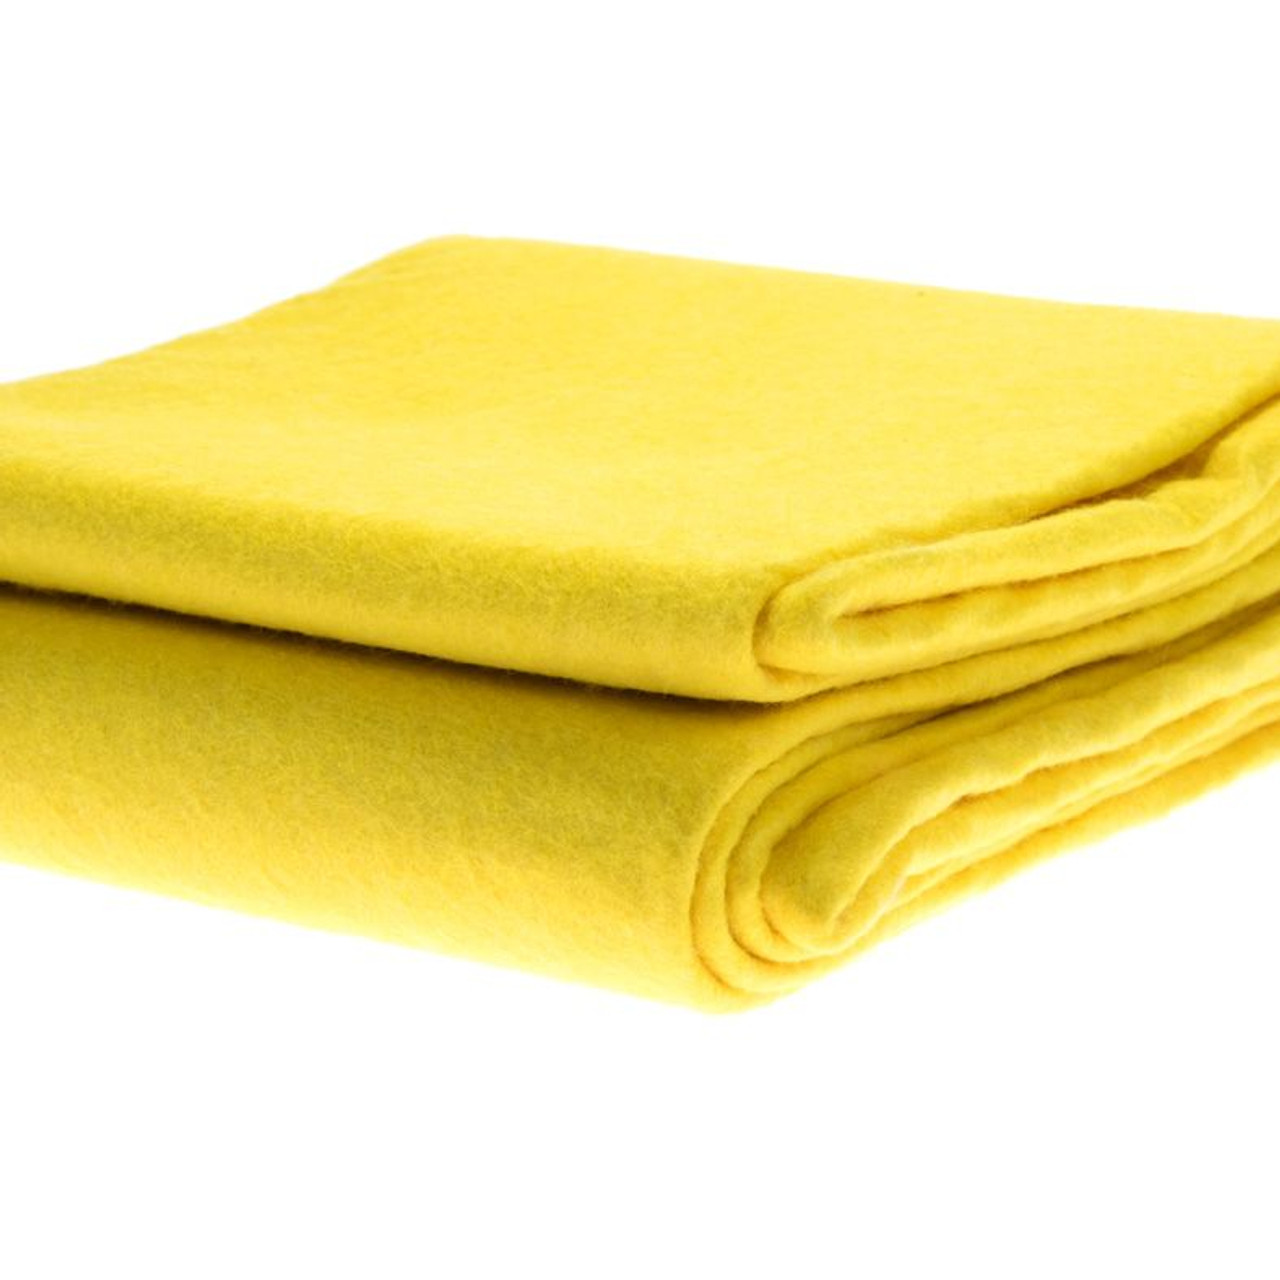 https://cdn11.bigcommerce.com/s-tumf4kk1l4/images/stencil/1280x1280/products/3136/5764/27-x-50-camp-towel-yellow-non-woven-super-absorbent-material-25__29489.1640714996.jpg?c=1?imbypass=on